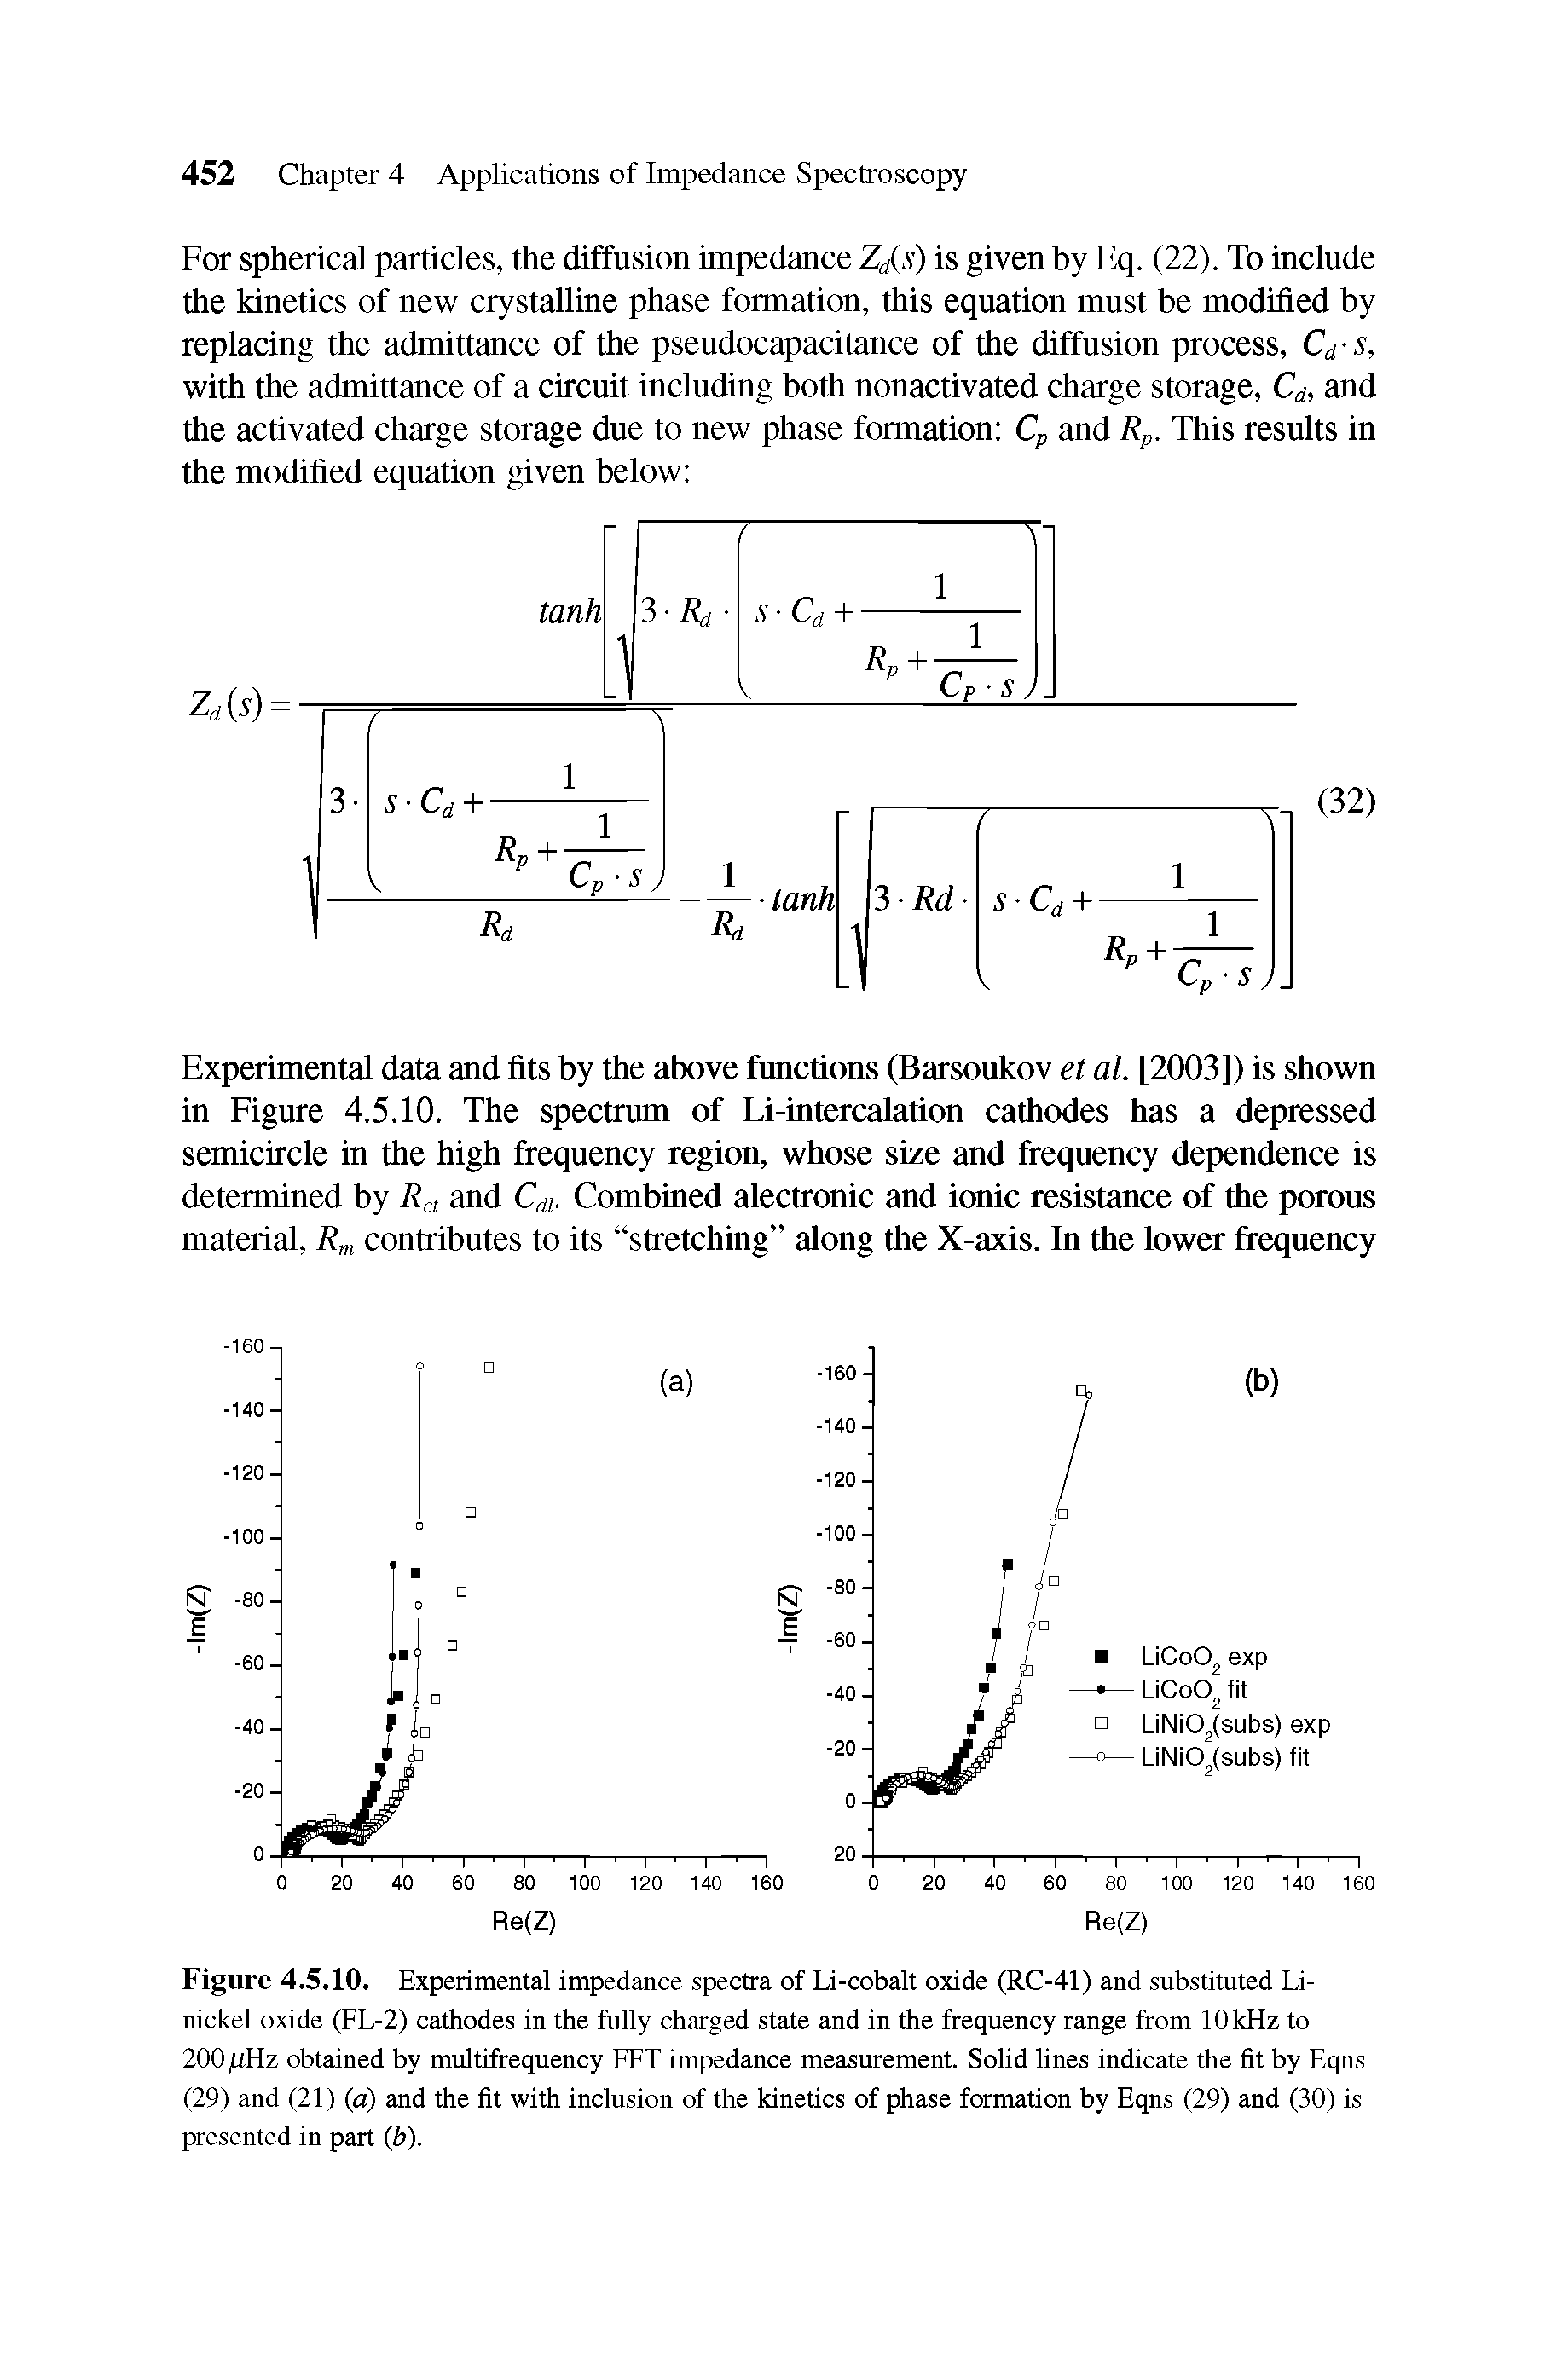 Figure 4.5.10. Experimental impedance spectra of Li-cobalt oxide (RC-41) and substituted Li-nickel oxide (FL-2) cathodes in the fully charged state and in the frequency range from 10 kHz to 200. uHz obtained by multifrequency FFT impedance measurement. Solid lines indicate the fit by Eqns (29) and (21) (a) and the fit with inclusion of the kinetics of phase formation by Eqns (29) and (30) is presented in part (b).